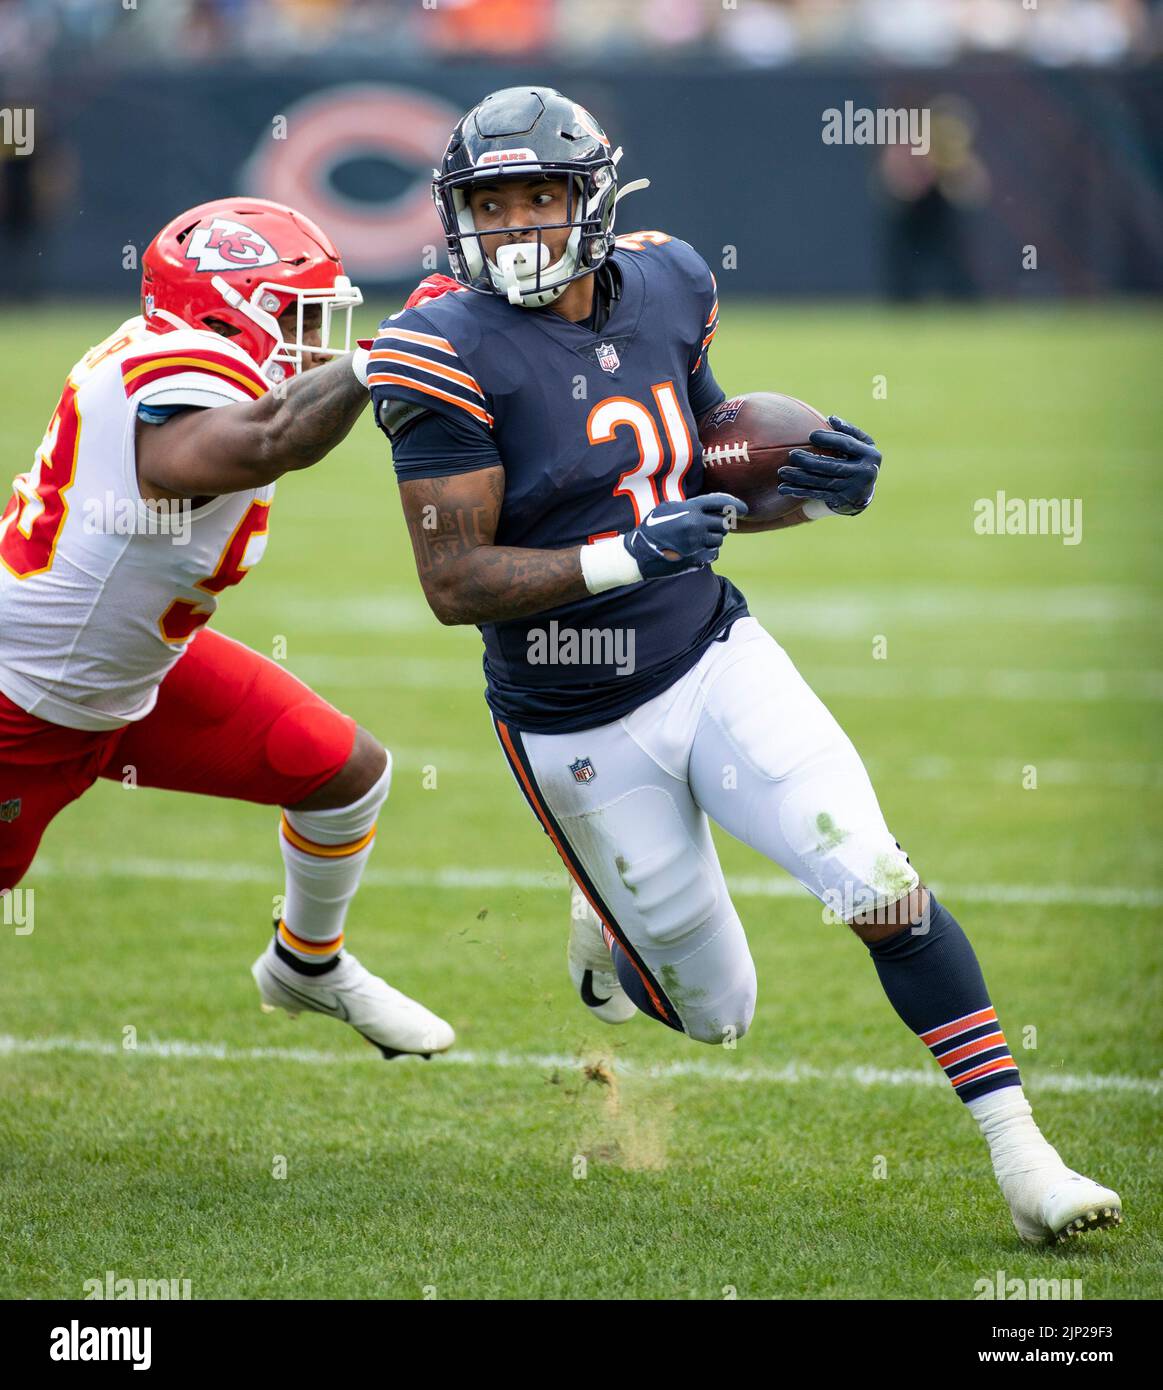 August 13, 2022: Chicago, Illinois, U.S. - Kansas City Chiefs #53 Jermaine Carter chases Chicago Bears #31 Trestan Ebner during the game between the Kansas City Chiefs and the Chicago Bears at Soldier Field in Chicago, IL. Stock Photo